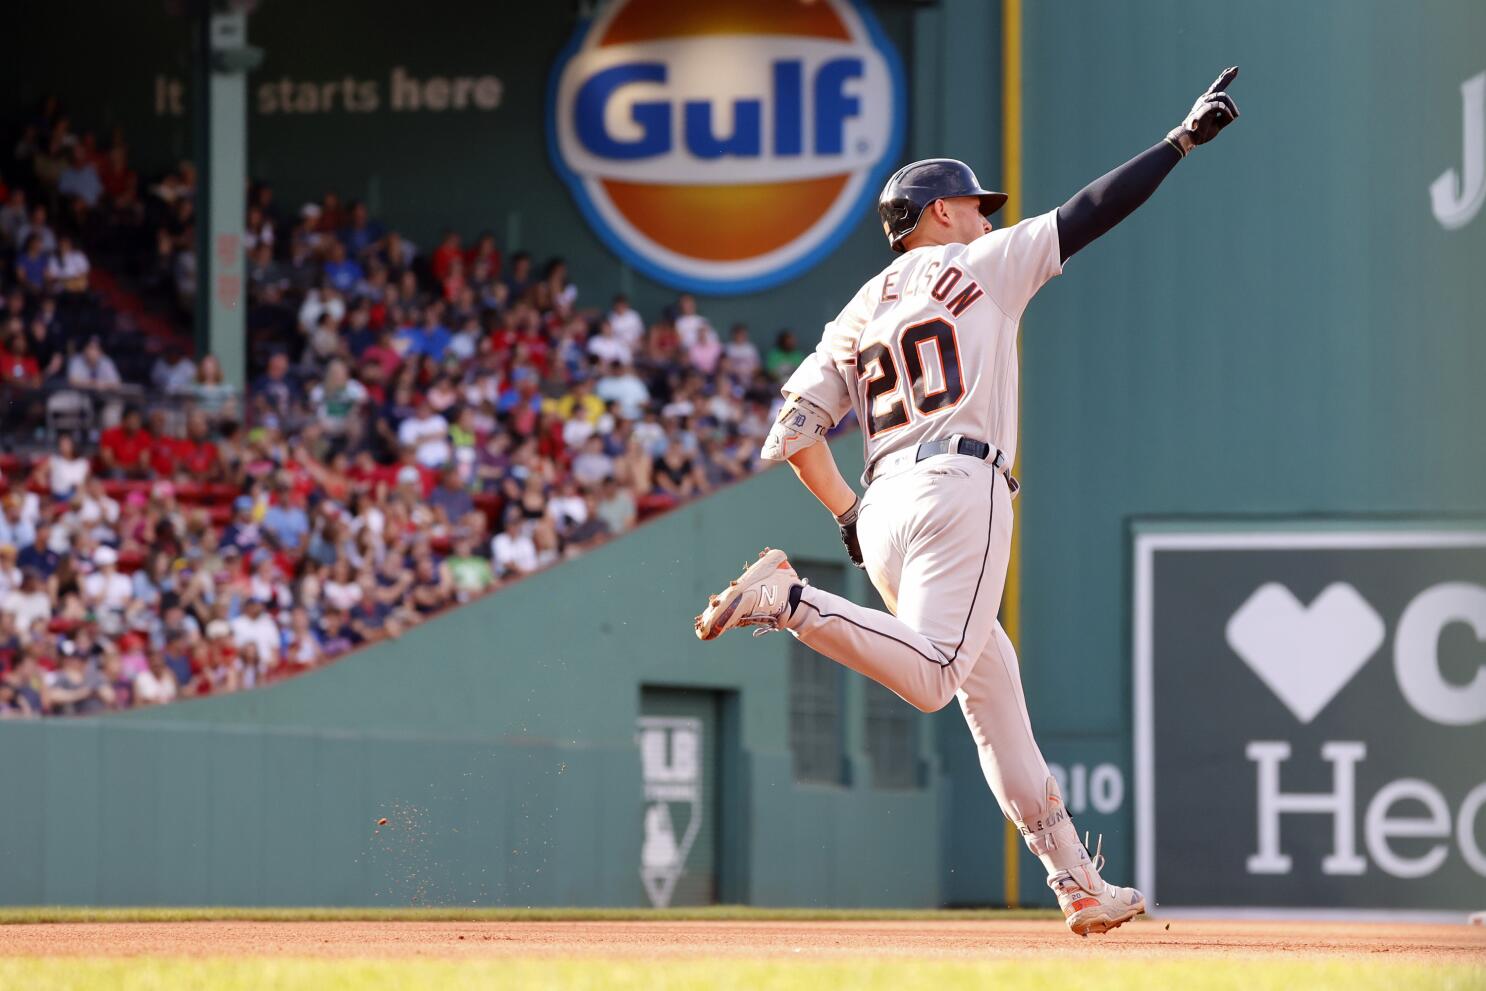 Red Sox expand their reach through Fenway Sports Group